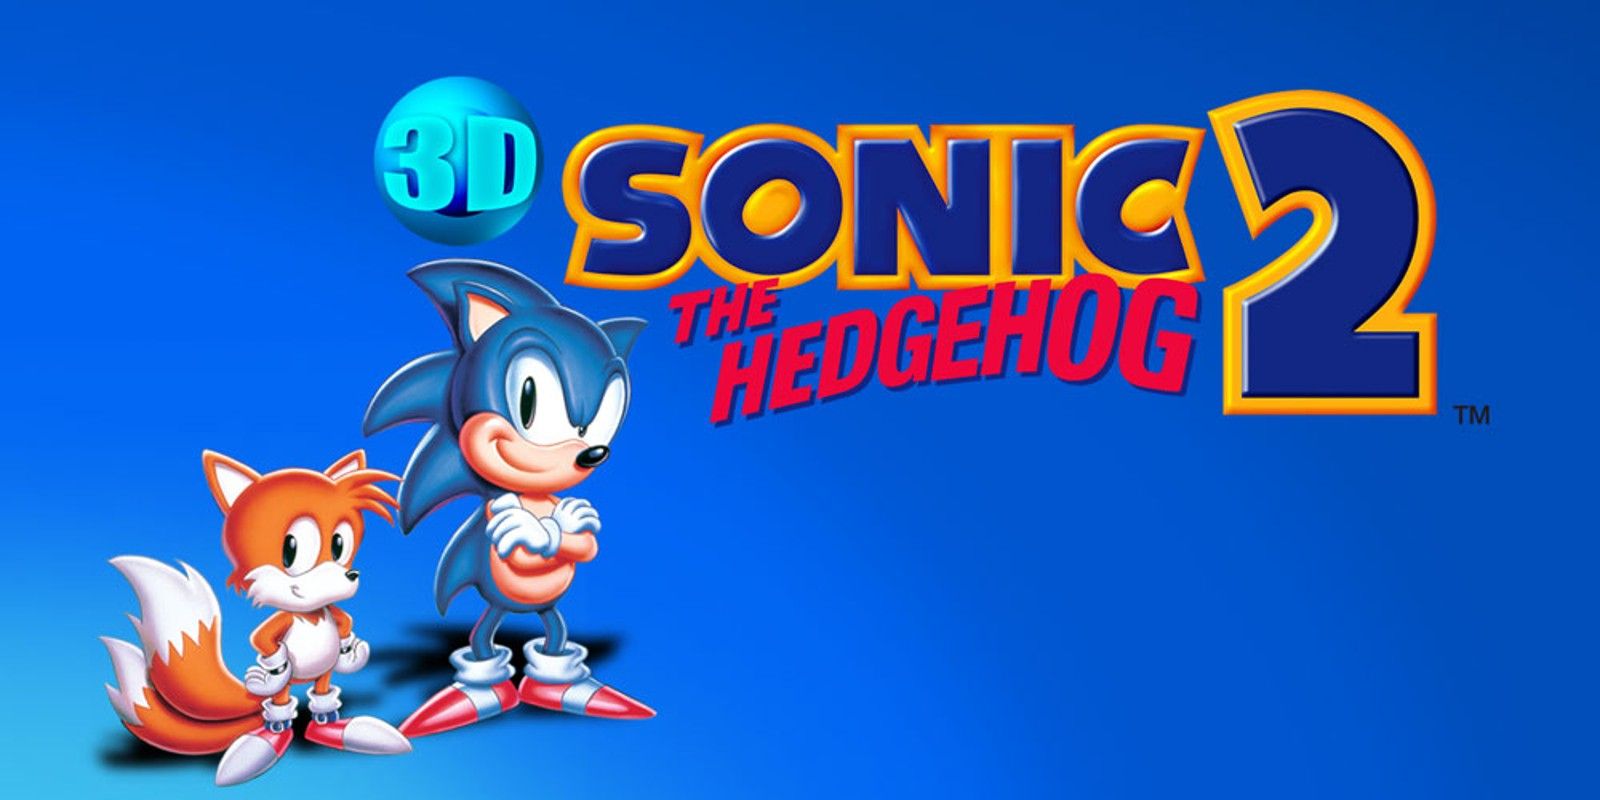 Sonic and Tails in 3D Sonic The Hedgehog 2